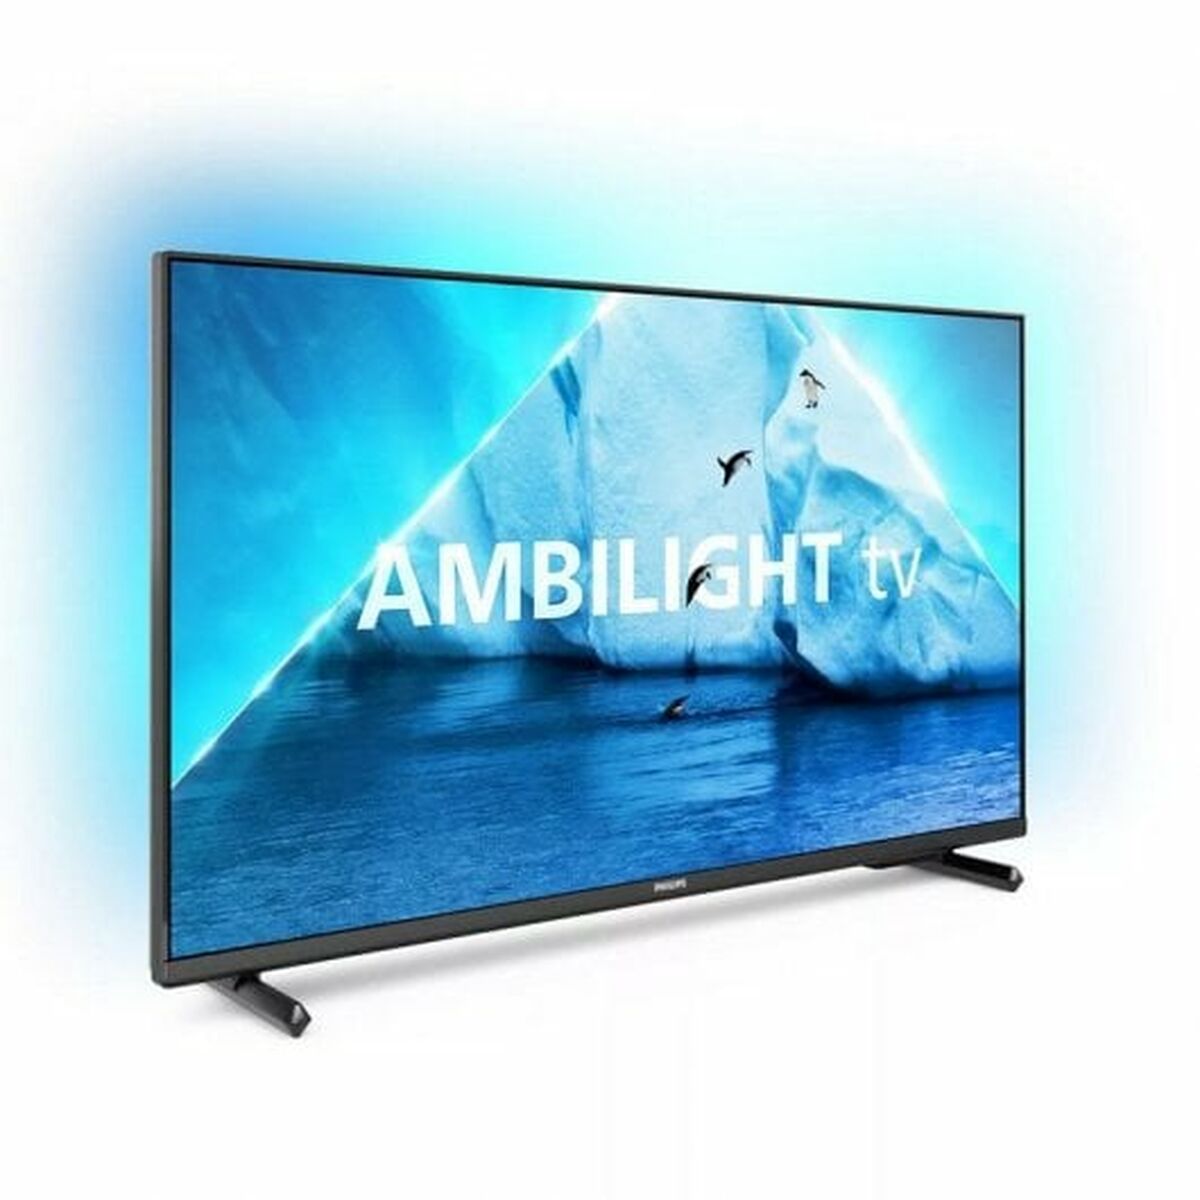 Smart TV Philips 32PFS6908/12 Full HD 32" LED HDR, Philips, Electronics, TV, Video and home cinema, smart-tv-philips-32pfs6908-12-full-hd-32-led-hdr, Brand_Philips, category-reference-2609, category-reference-2625, category-reference-2931, category-reference-t-18805, category-reference-t-18827, category-reference-t-19653, cinema and television, Condition_NEW, entertainment, Price_200 - 300, UEFA Euro 2020, RiotNook